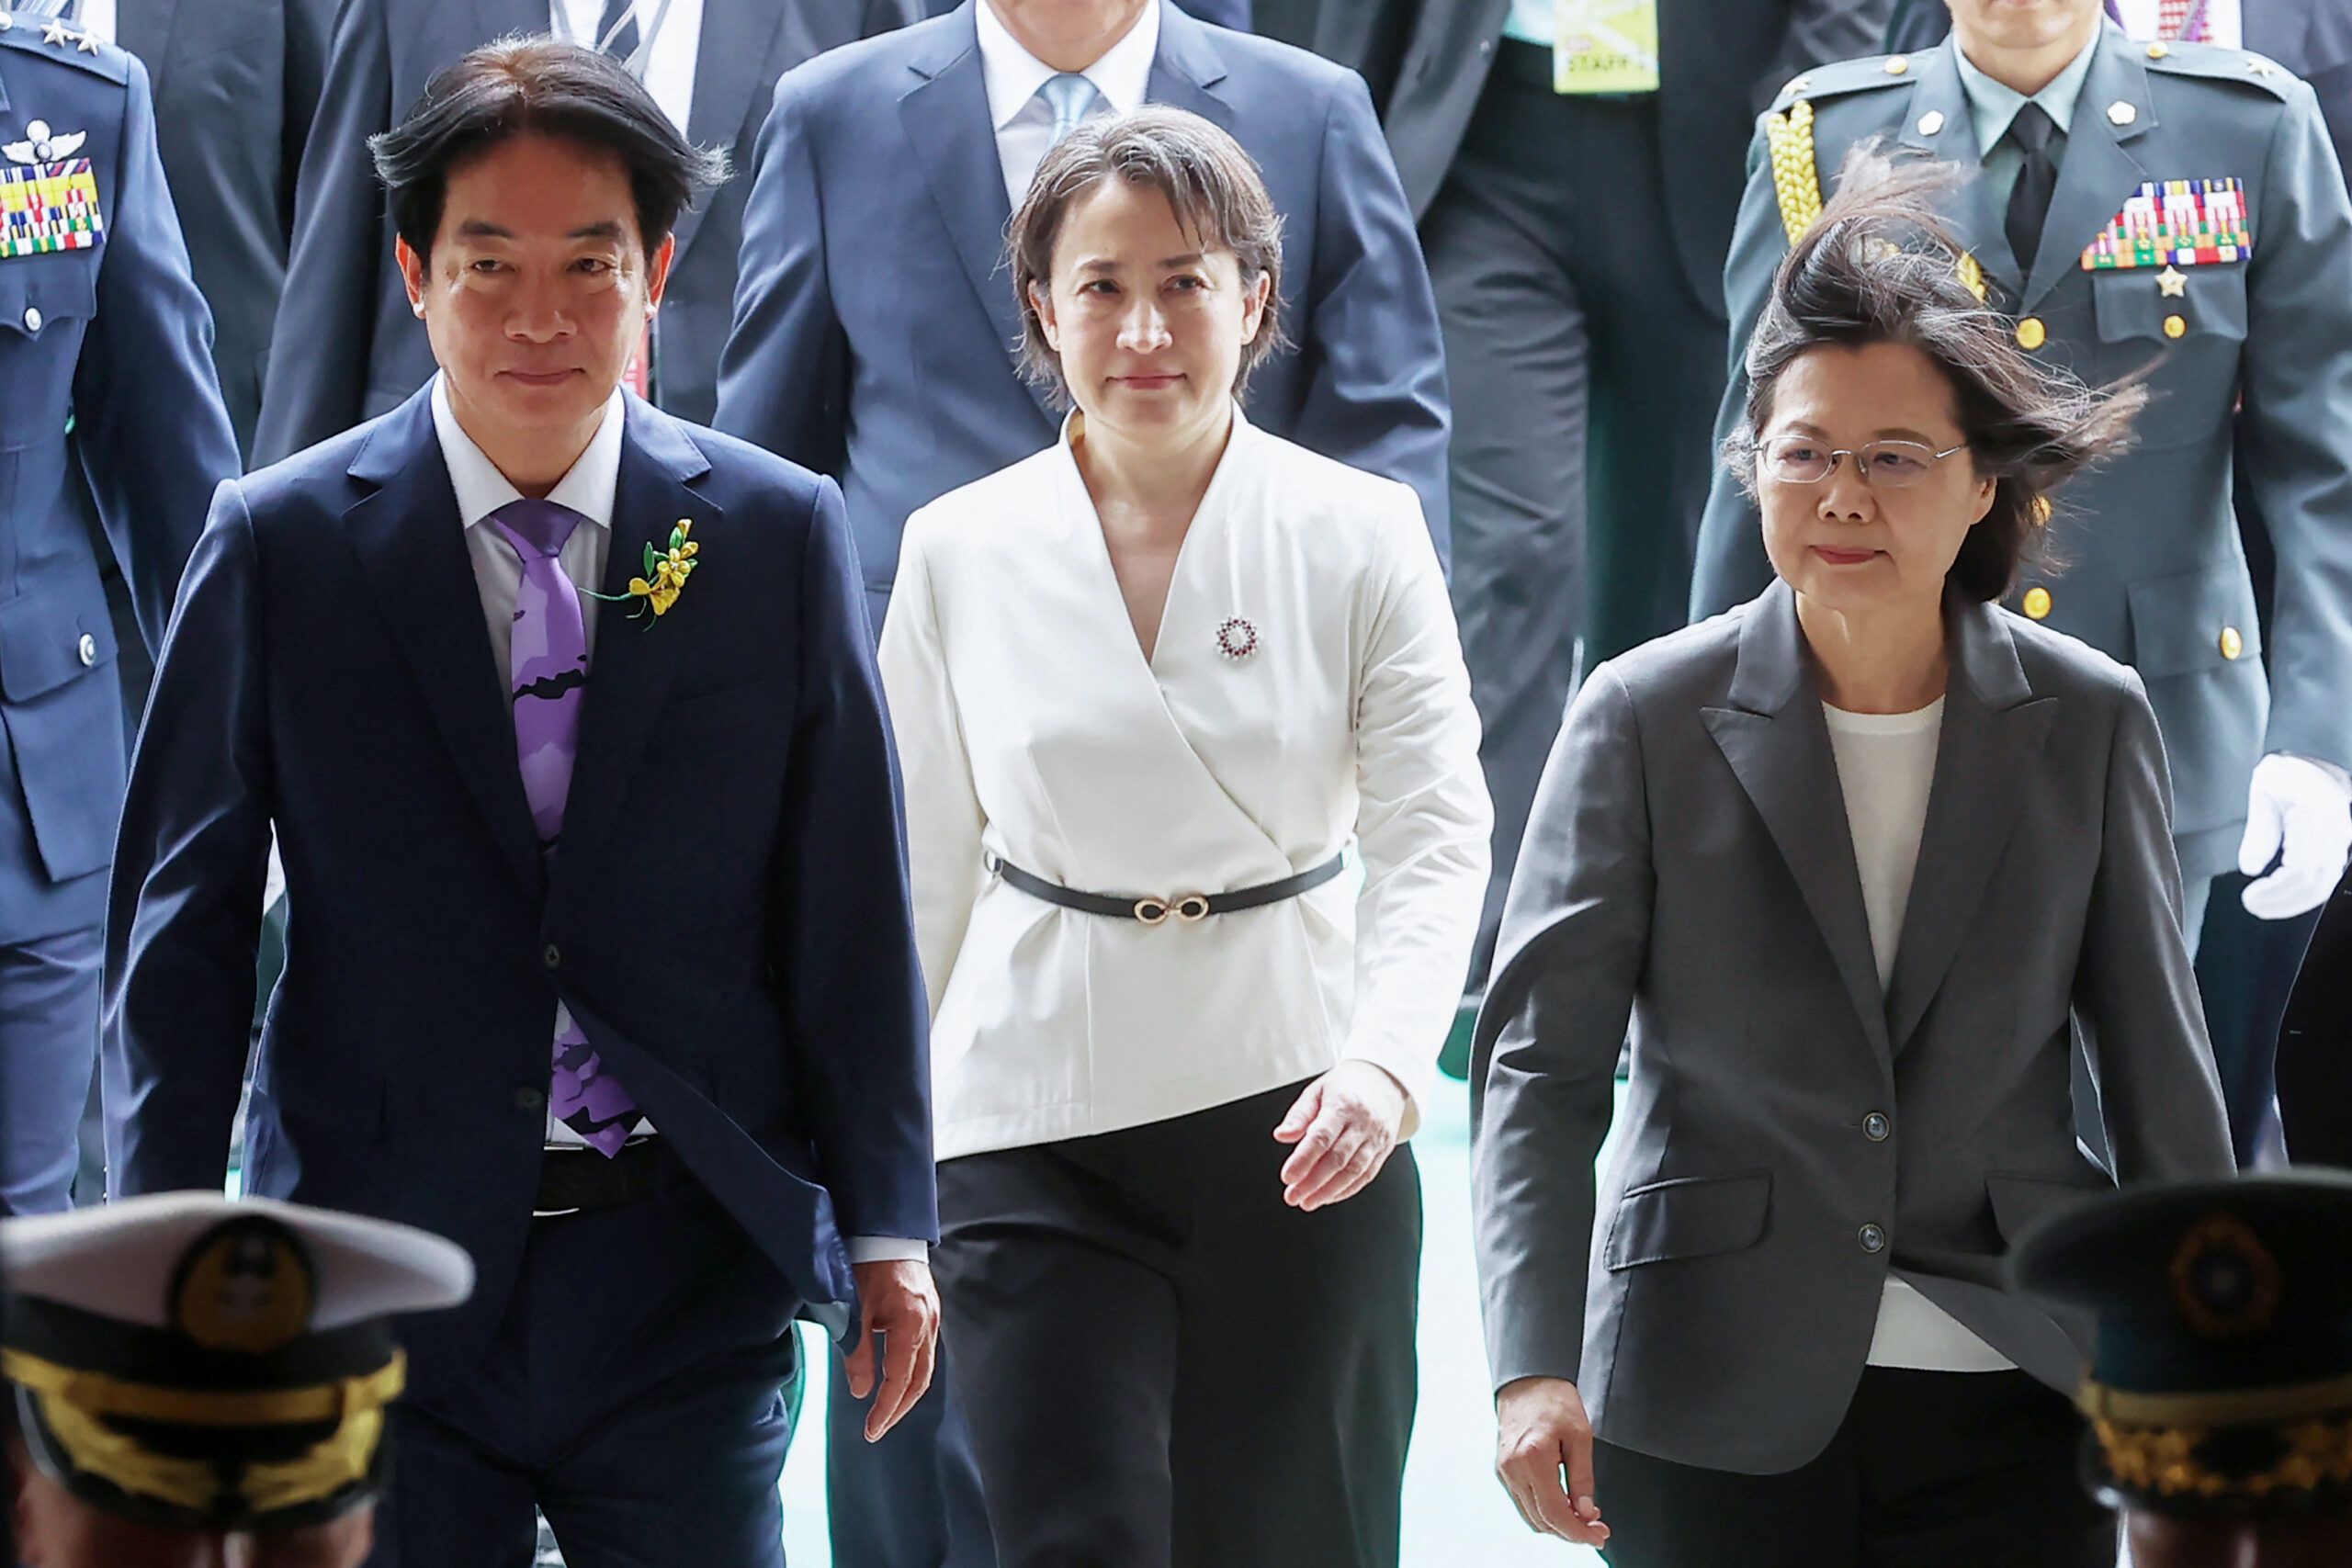 Taiwan's President Lai Ching-te (L), Vice President Hsiao Bi-khim (R) and former president Tsai Ing-wen (L) walking during the inauguration ceremony at the Presidential Office Building in Taipei.